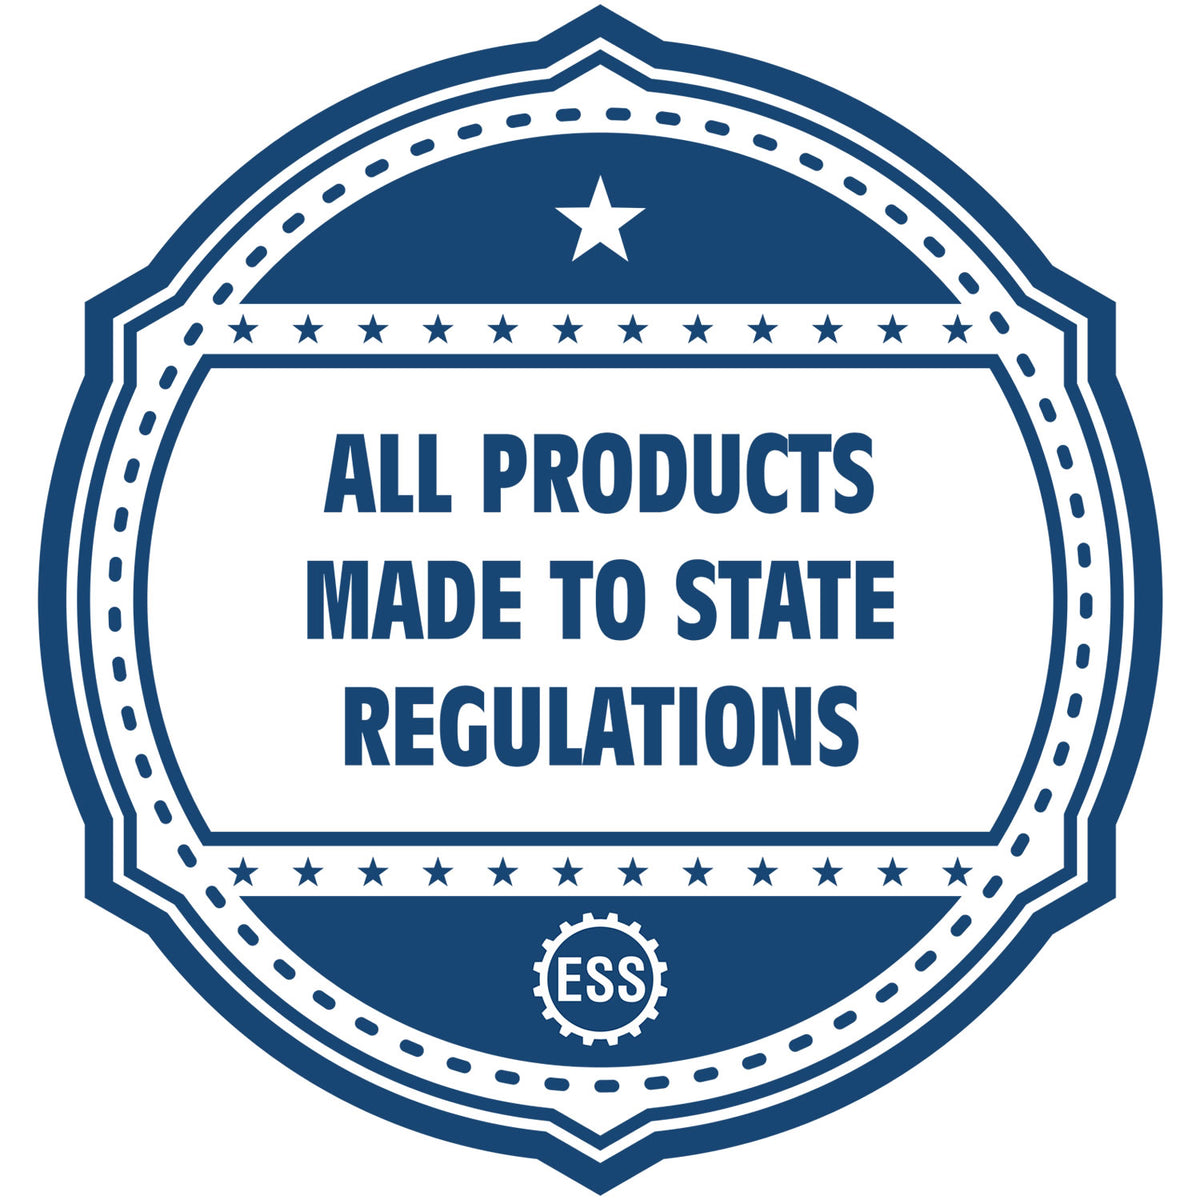 A blue icon or badge for the Hybrid Missouri Engineer Seal showing that this product is made in compliance with state regulations.